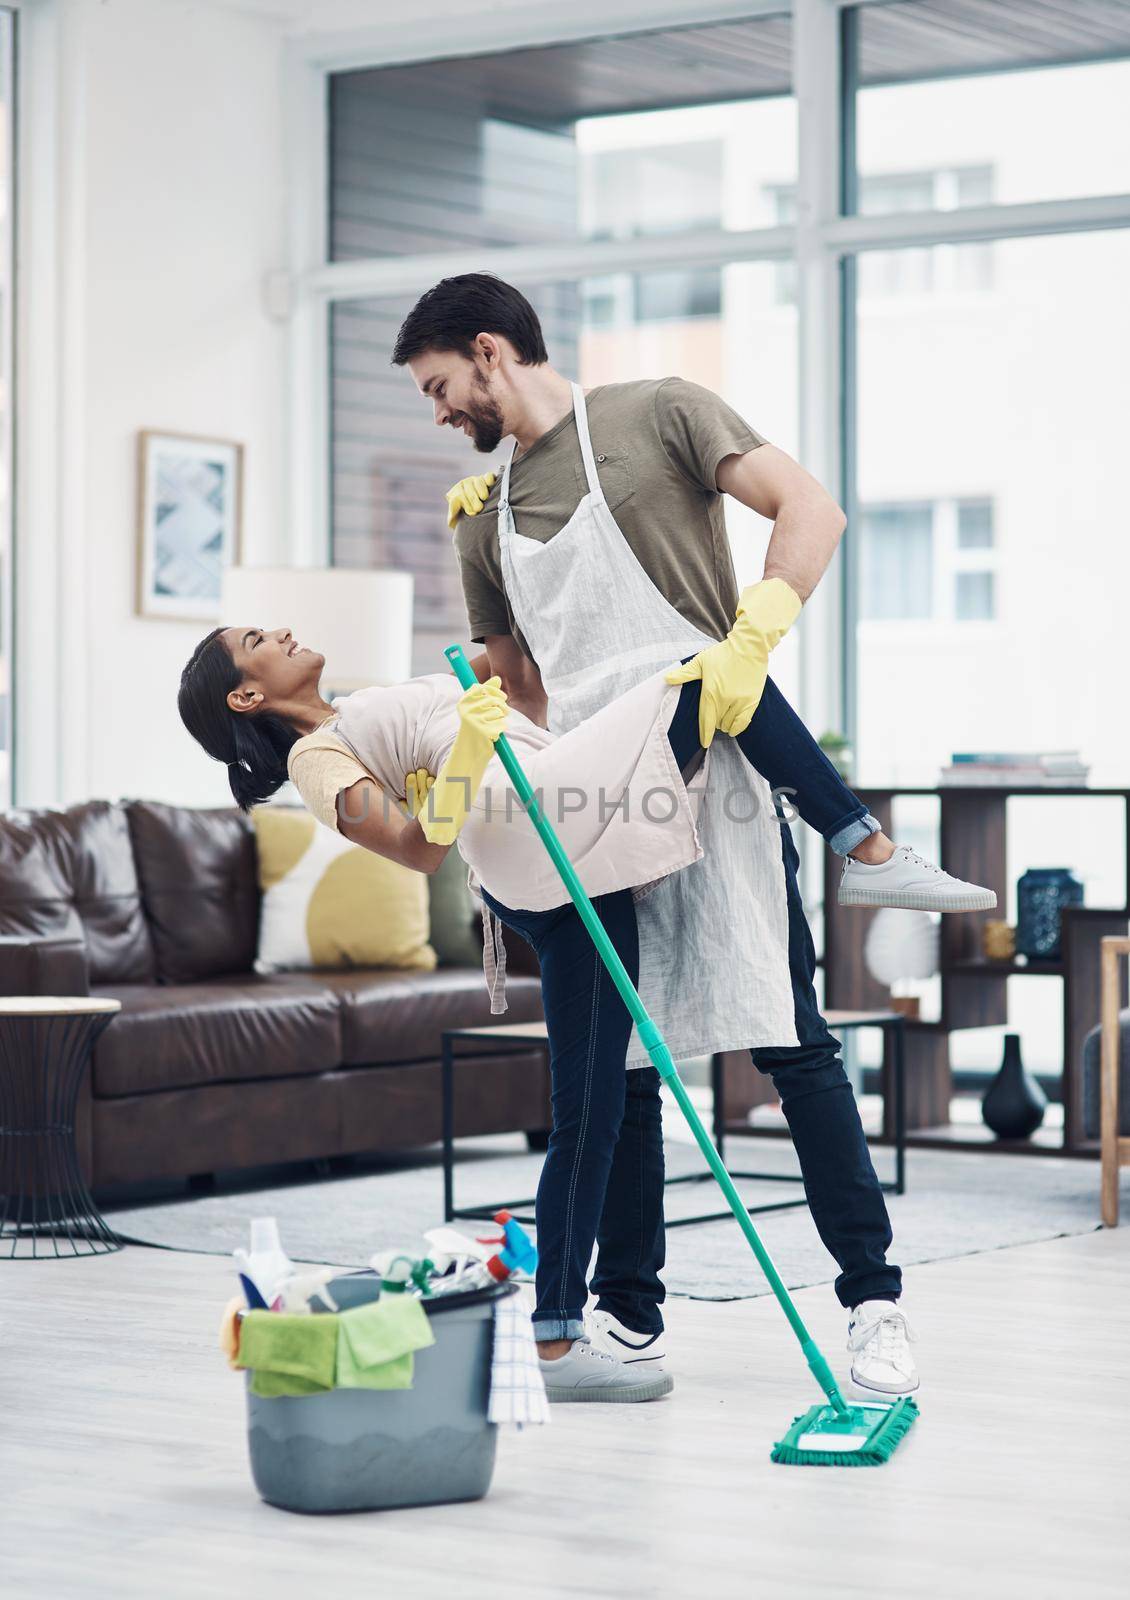 Romance changes everything. Shot of a happy young couple dancing while mopping the floor at home. by YuriArcurs